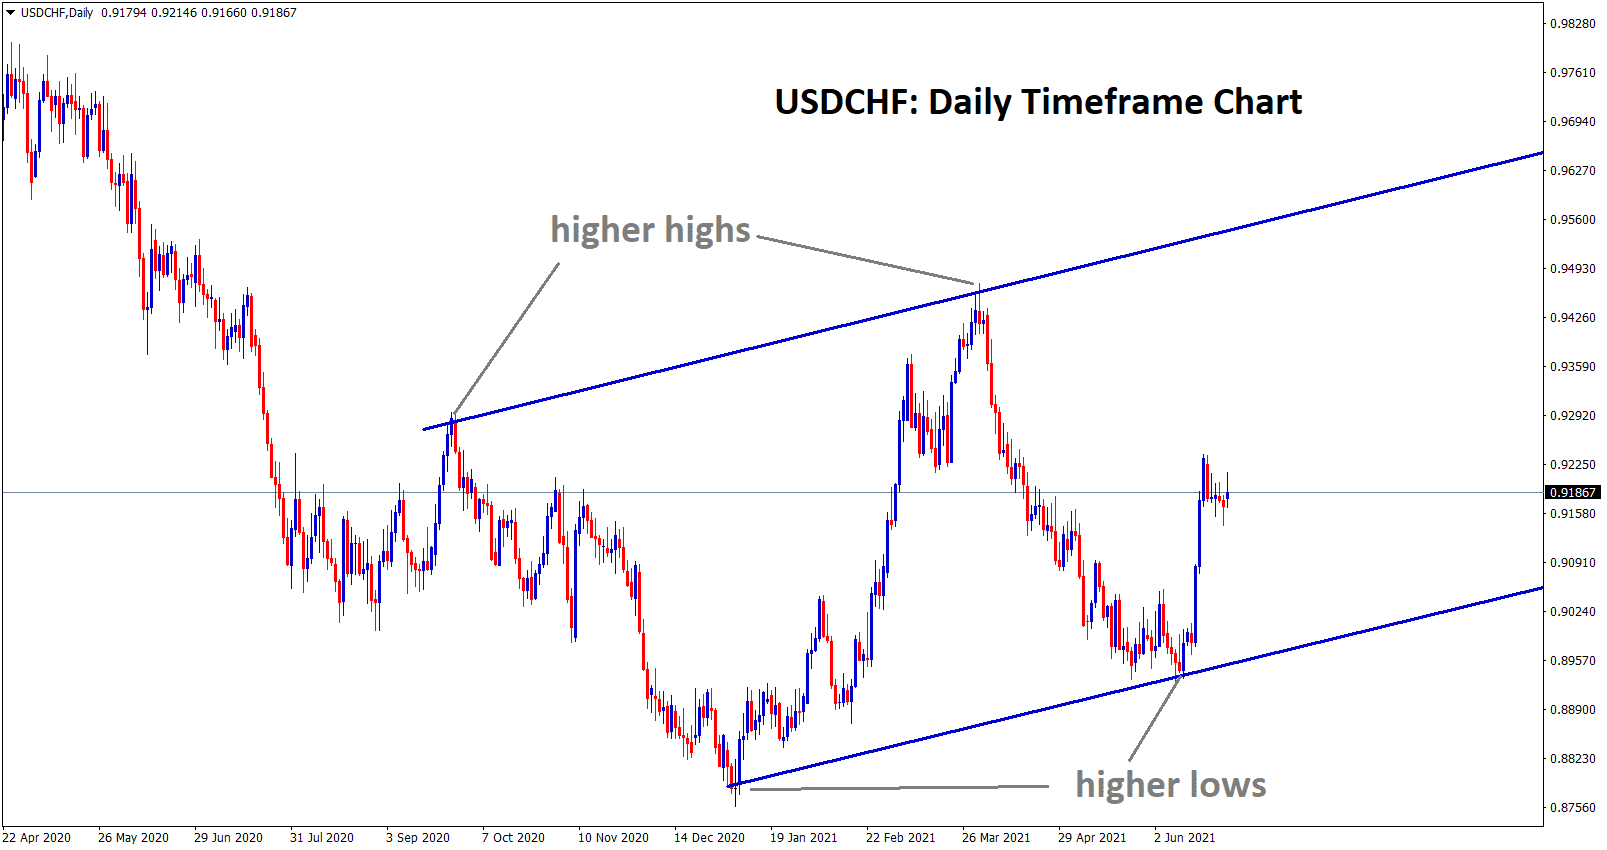 USDCHF is moving in an Uptrend range